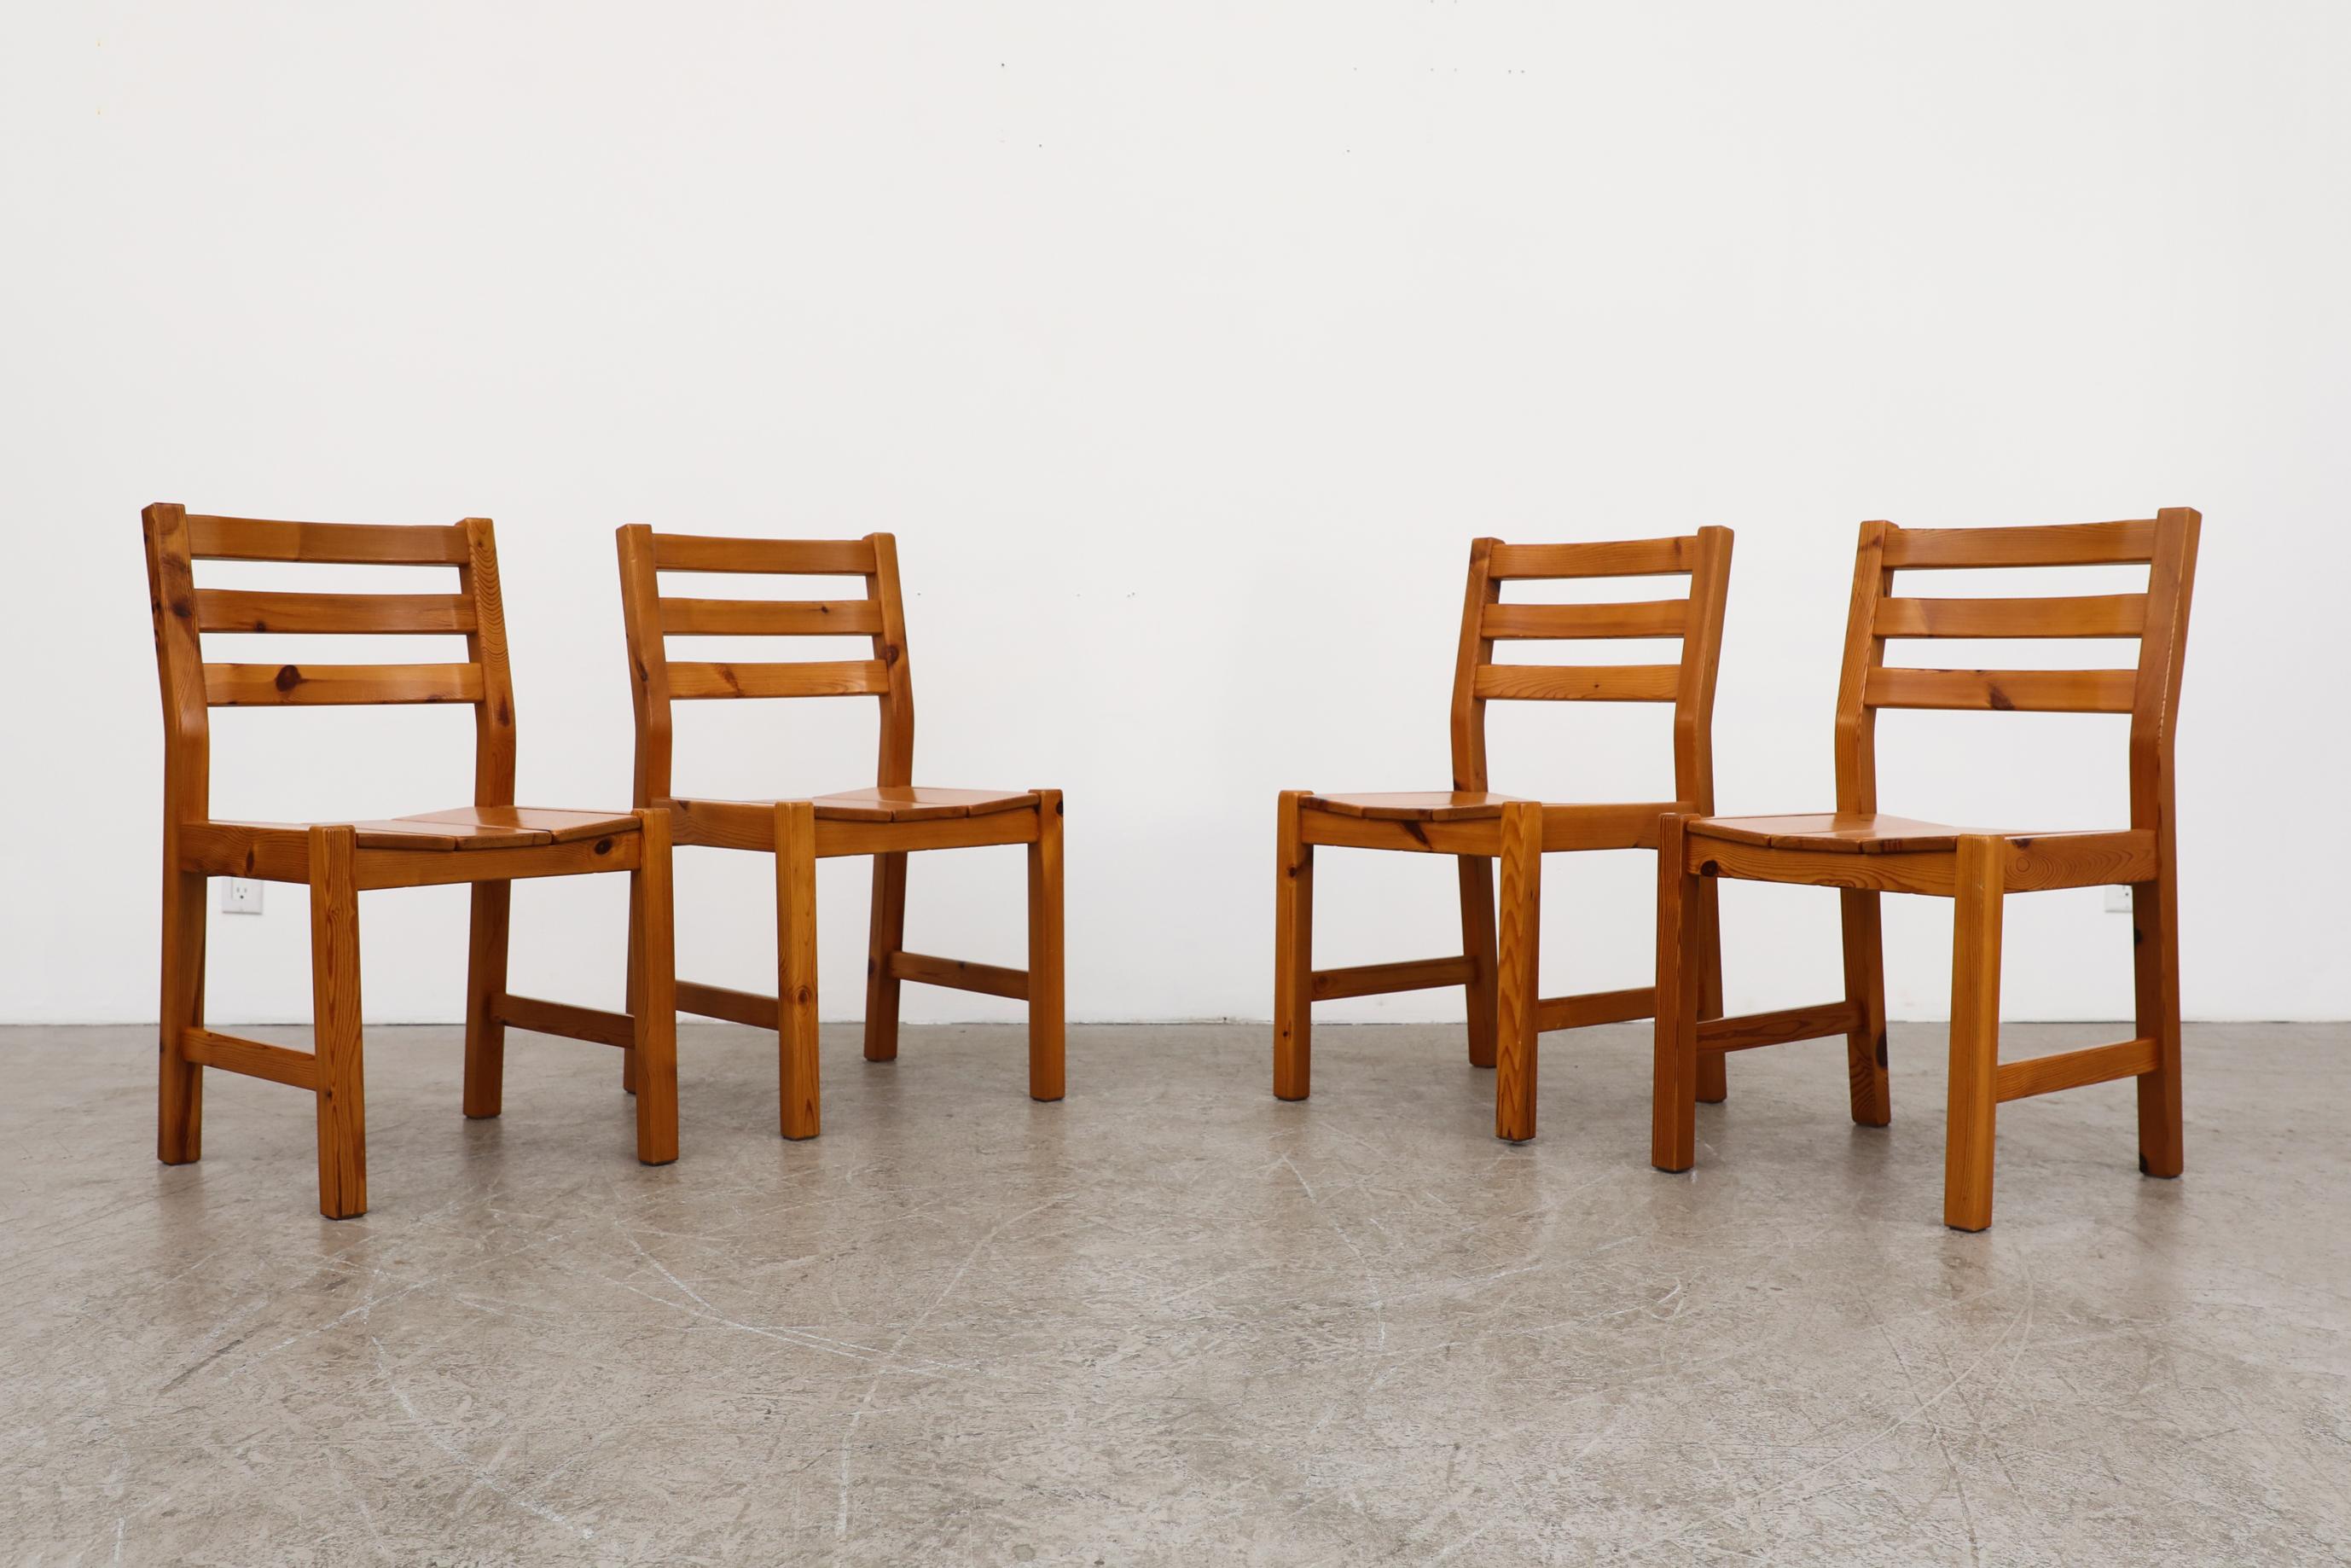 These four pine dining chairs have handsome grain patterns, ladder backs and slatted seats that slightly curve up. The chairs are in original condition with visible wear, including some light scratches and normal wear consistent with their age and